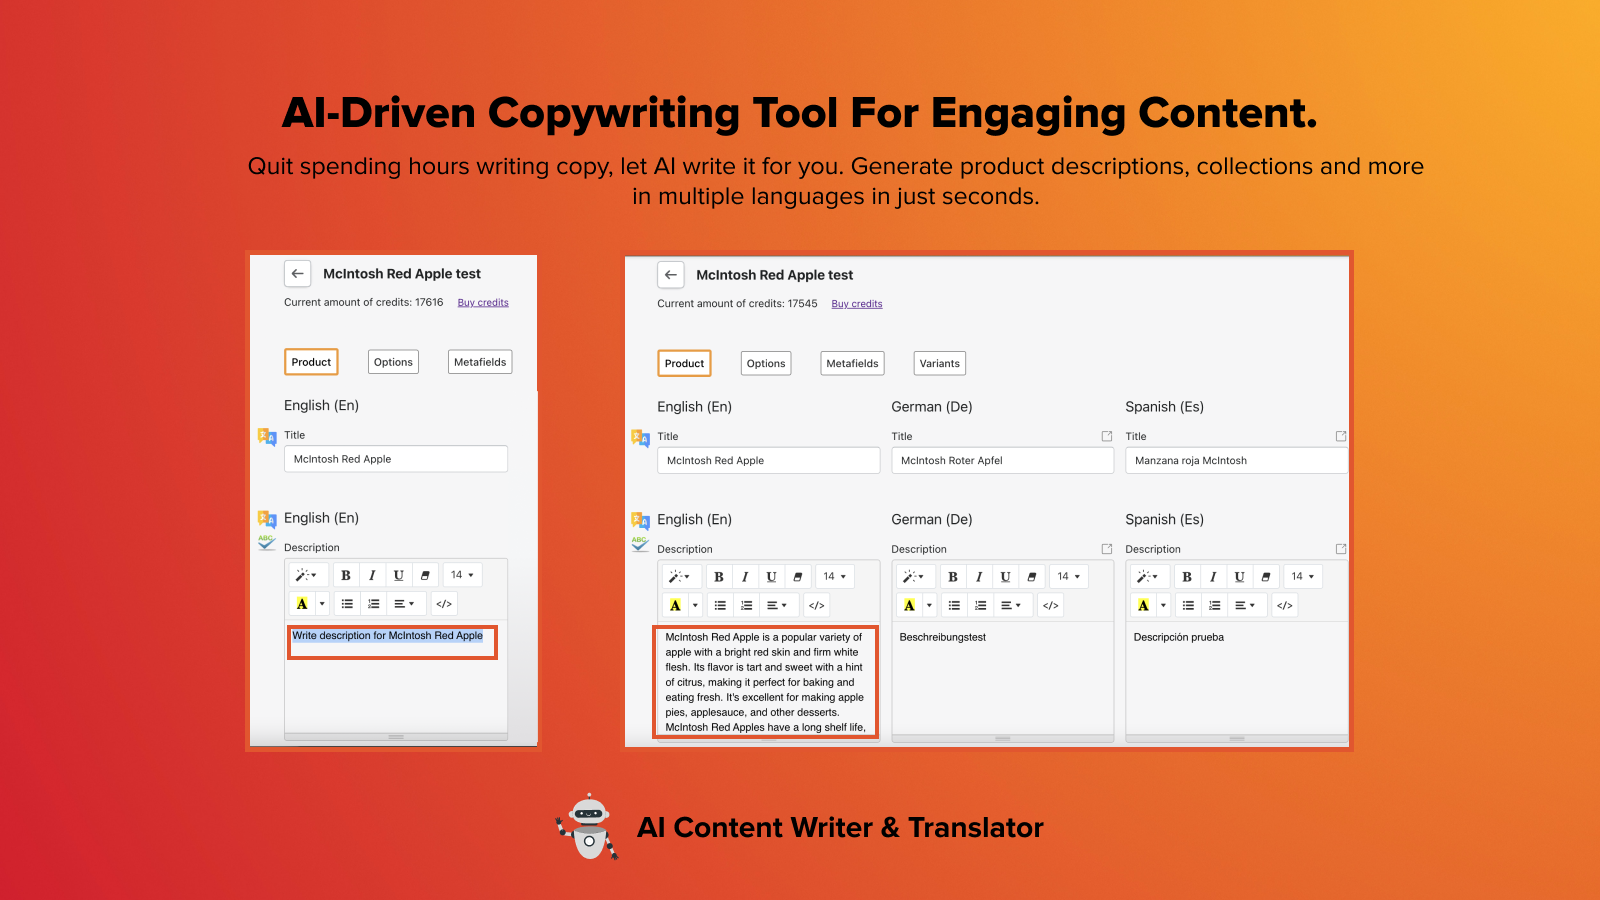 Quit spending hours writing copy, let AI write it for you.